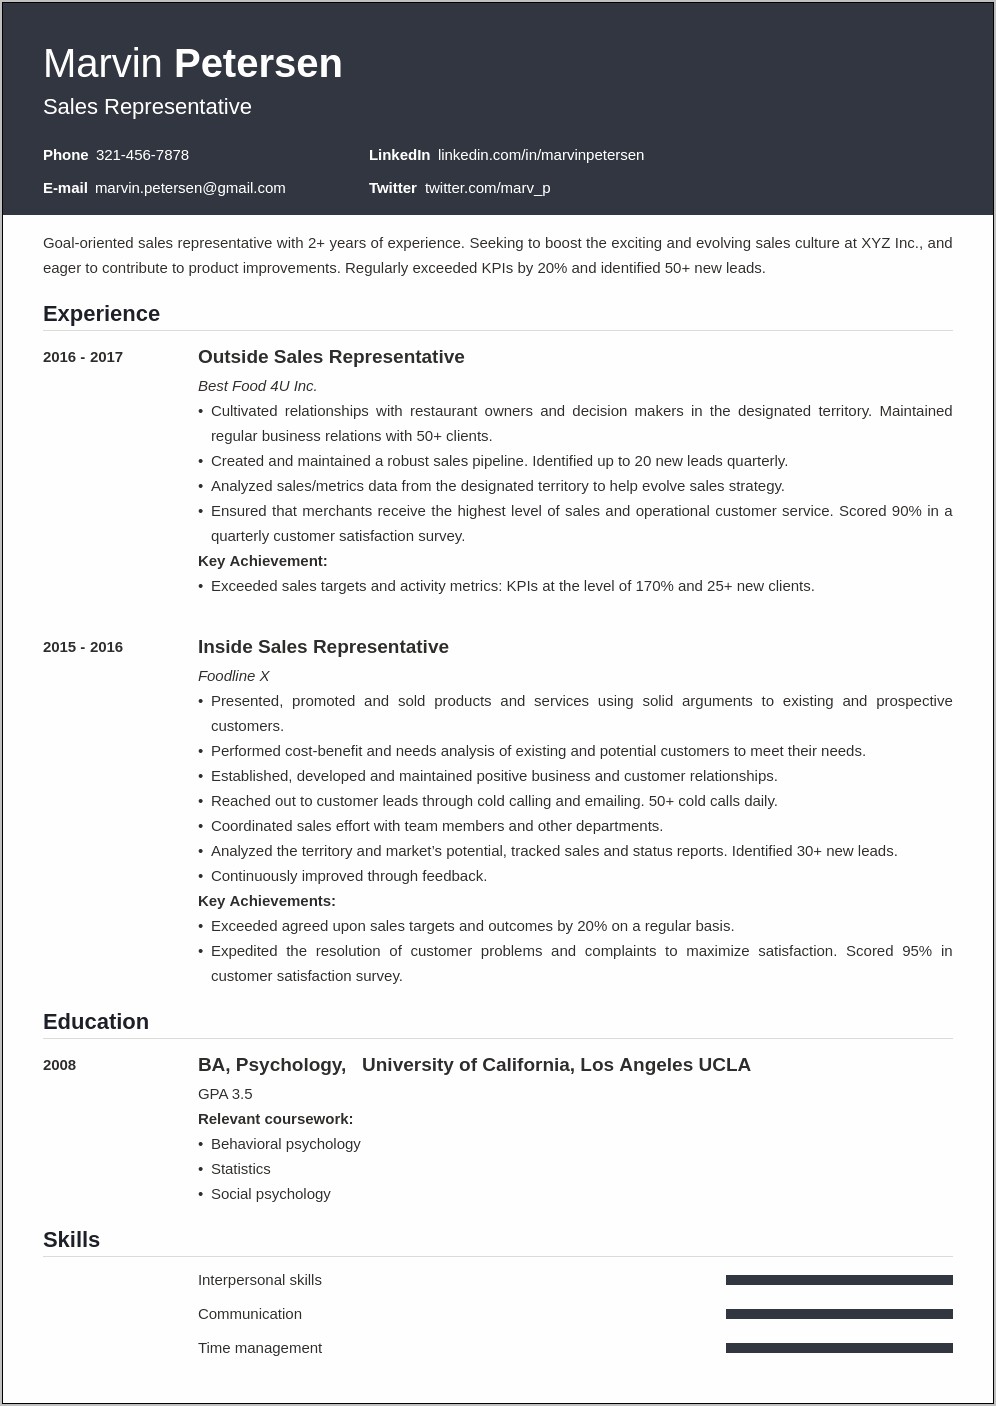 Resume Summary Or Objective For Customer Service Rep